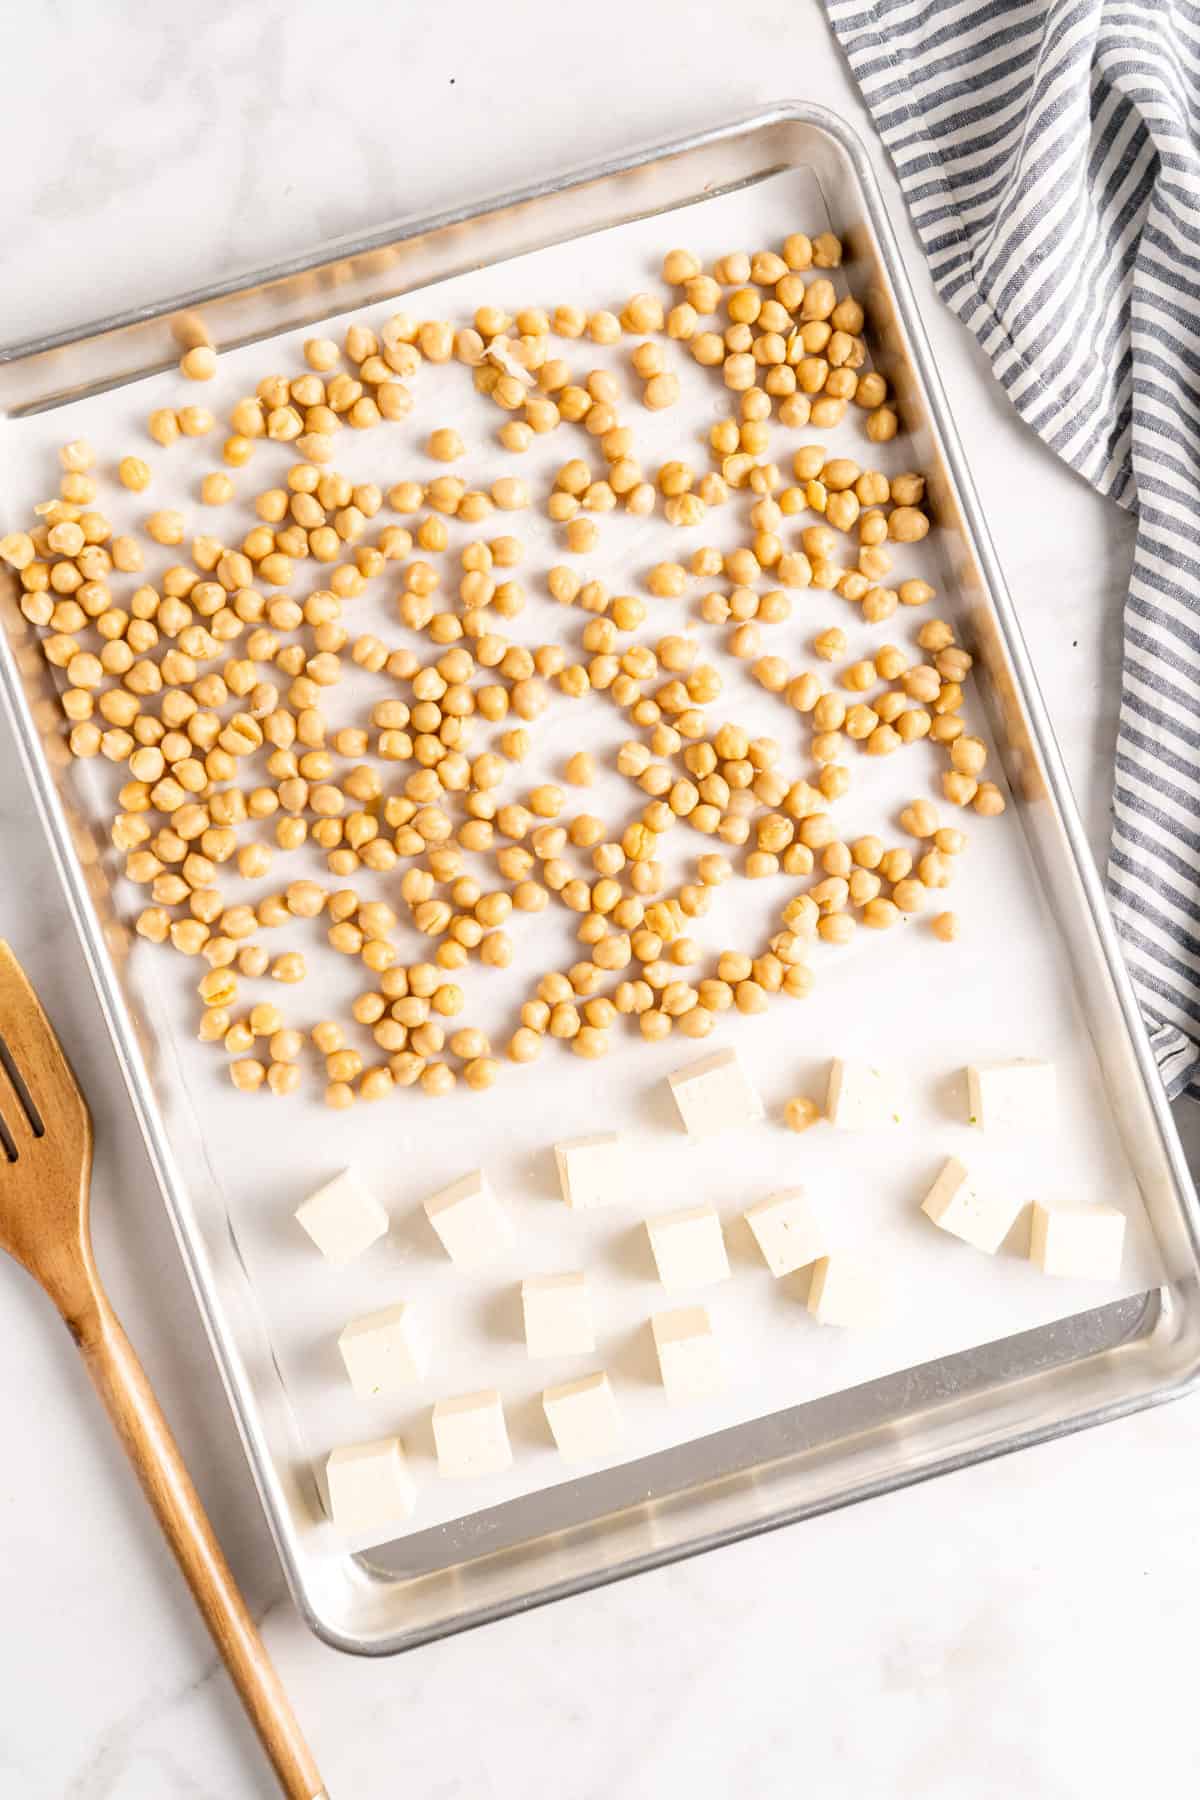 Overhead view of chickpeas and tofu on parchment lined sheet pan